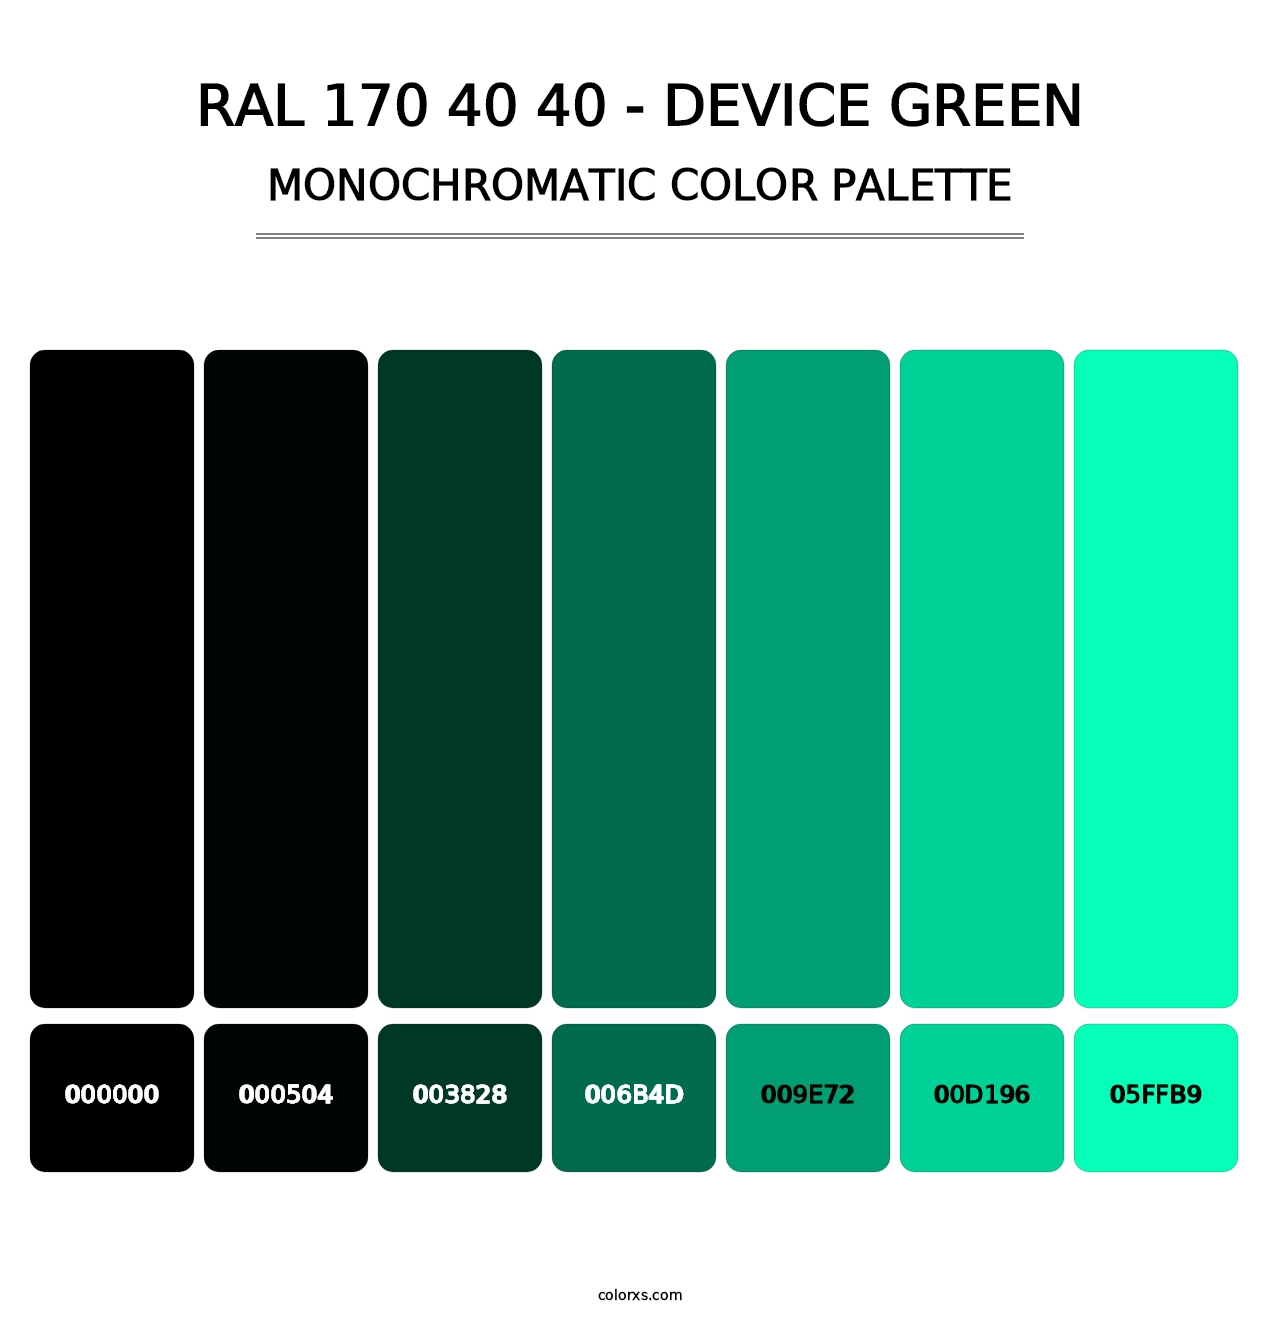 RAL 170 40 40 - Device Green - Monochromatic Color Palette